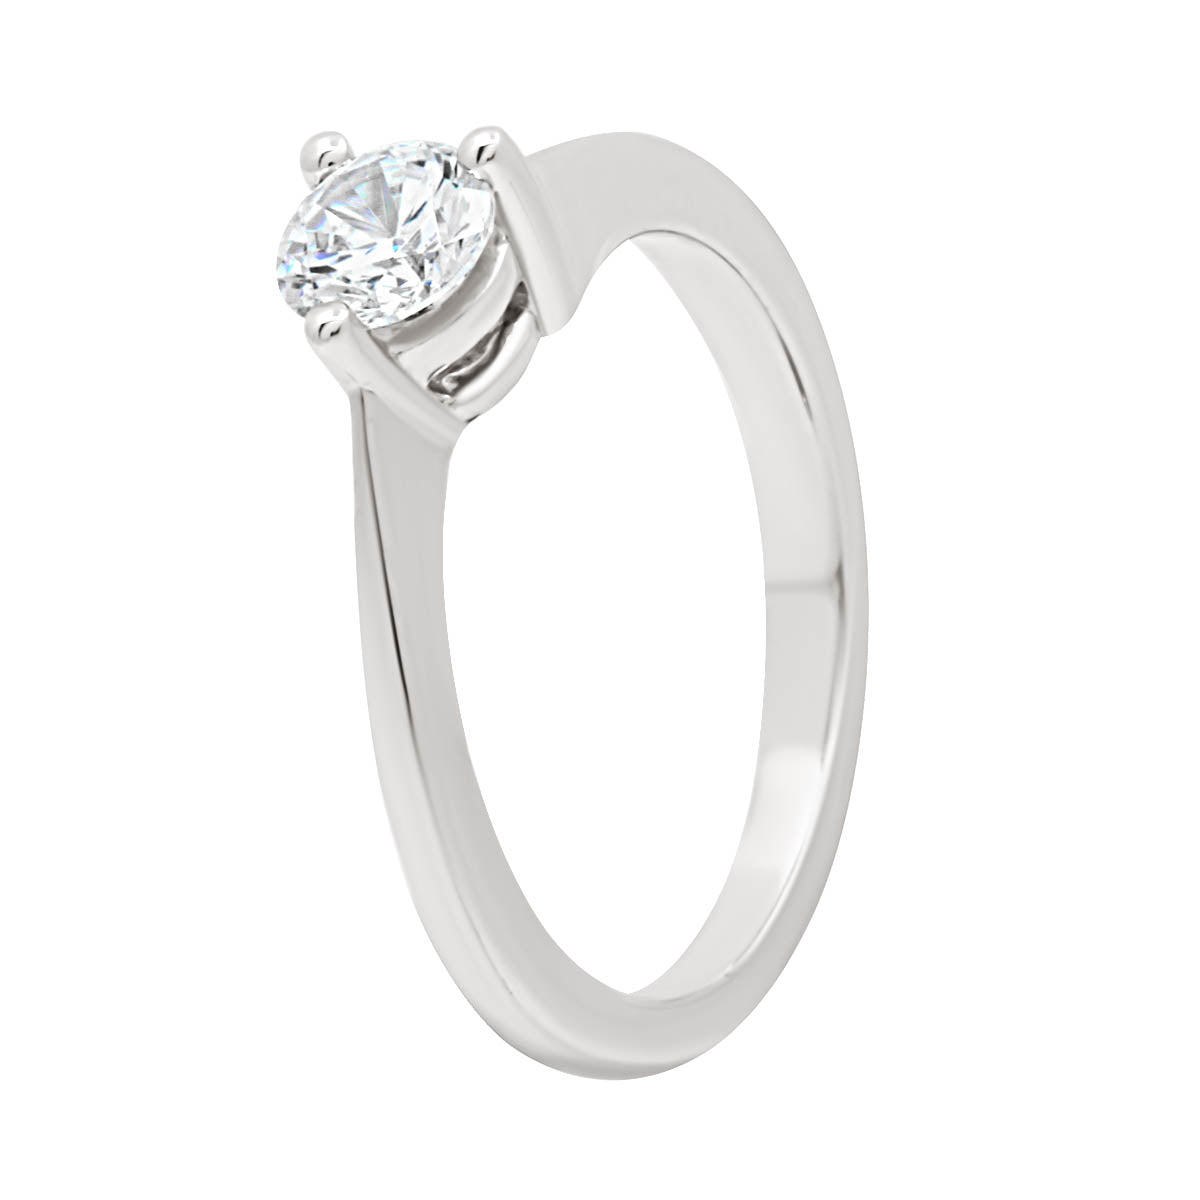 Three Claw Engagement Ring in white gold standing at an angle